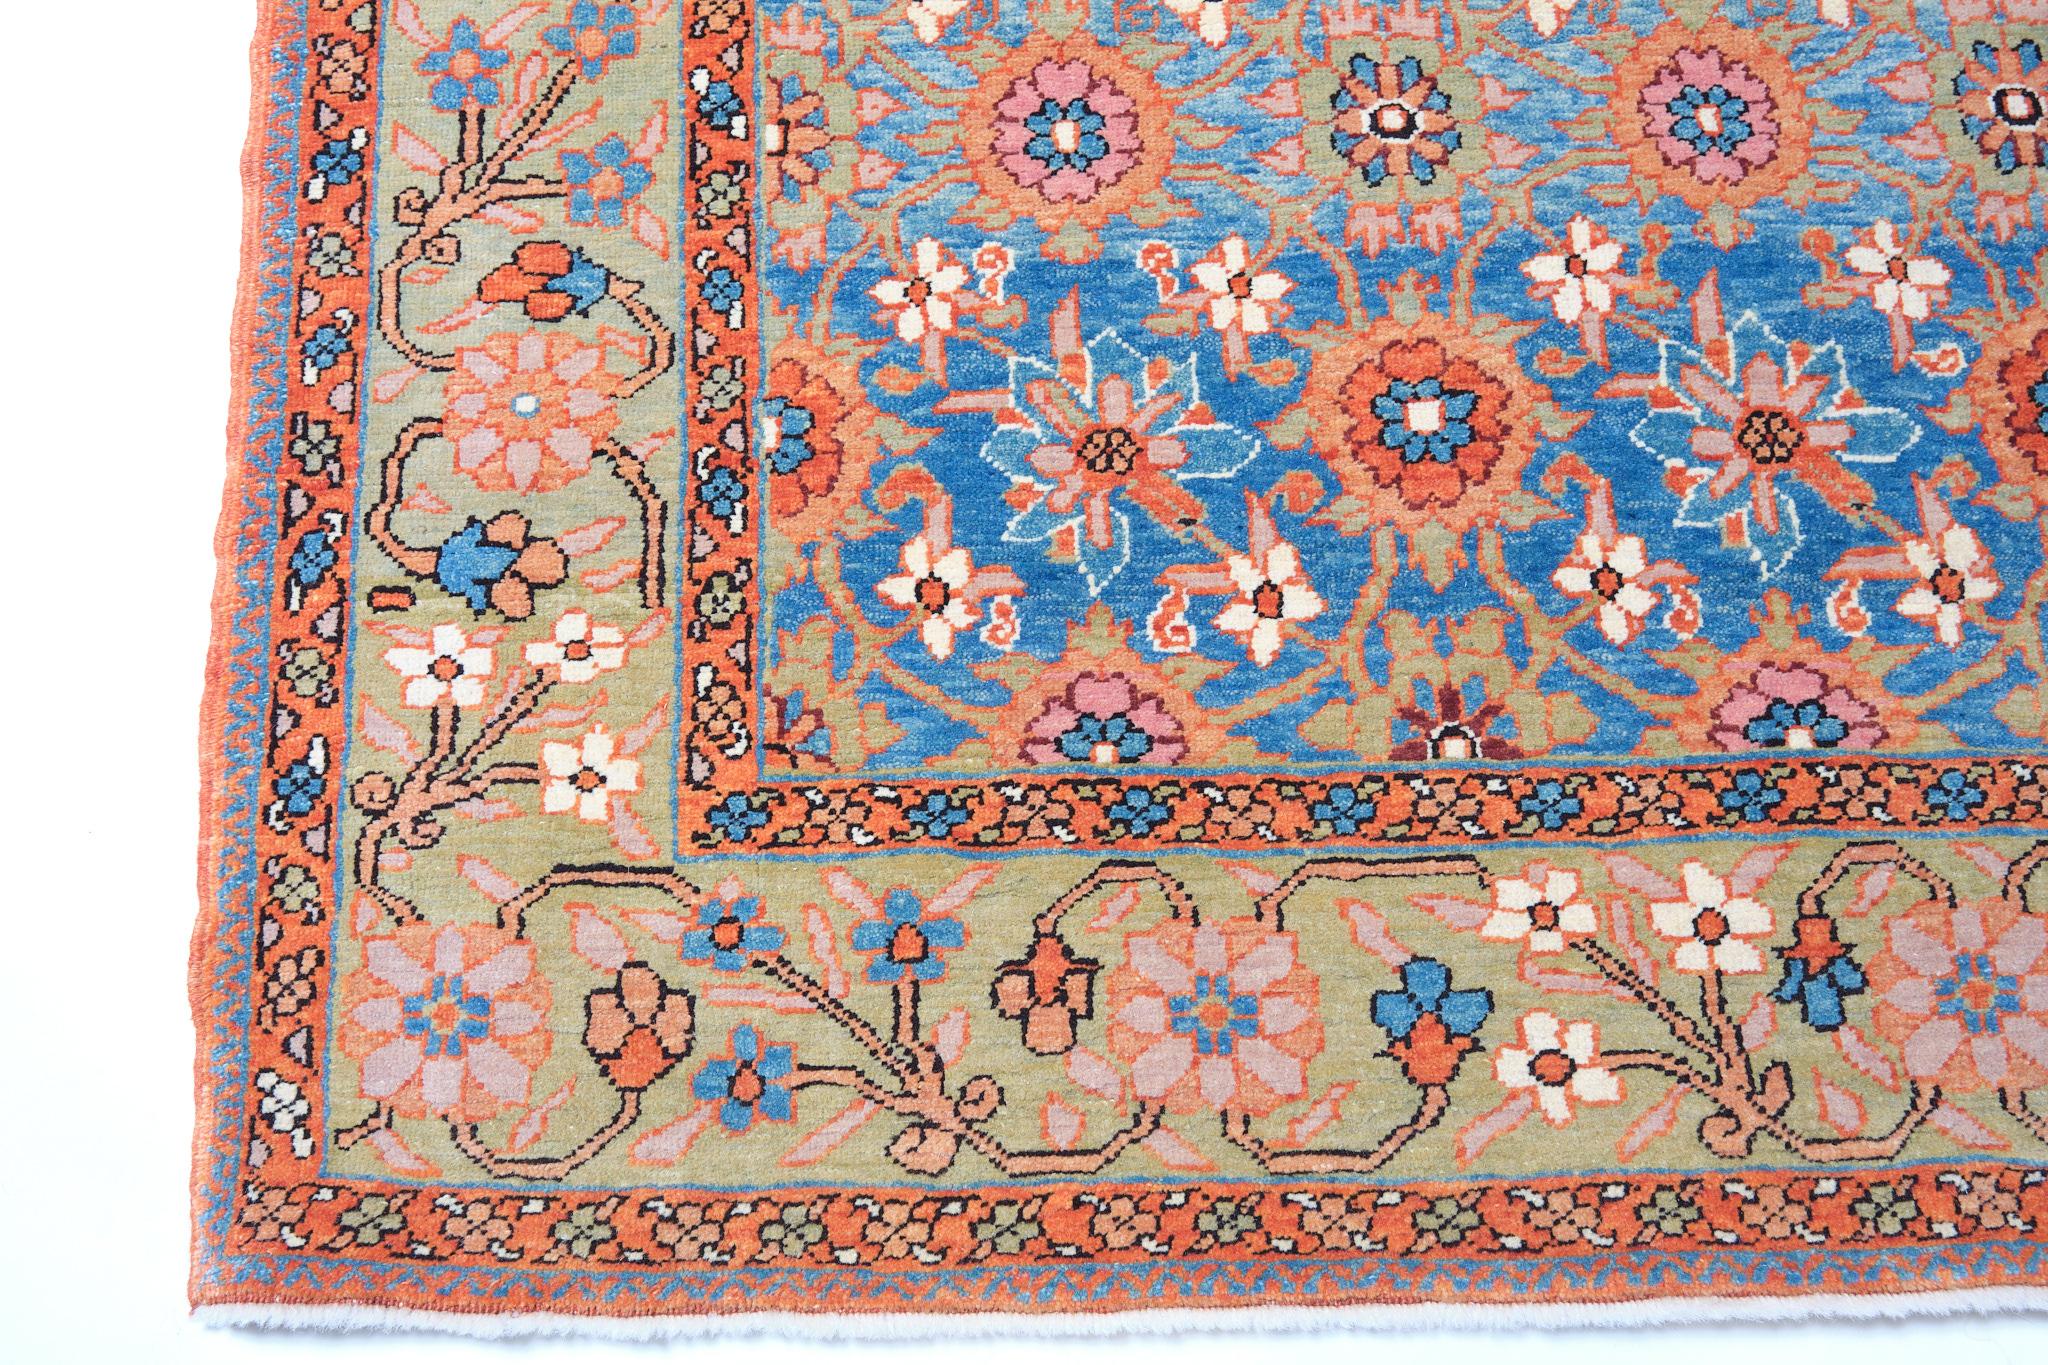 The source of the rug comes from the book Antique Rugs of Kurdistan A Historical Legacy of Woven Art, James D. Burns, 2002 nr.2. This was an exclusive example of a Mina Khani lattice design Mid-19th Century rug from Koliya’i, Southern Kurdistan